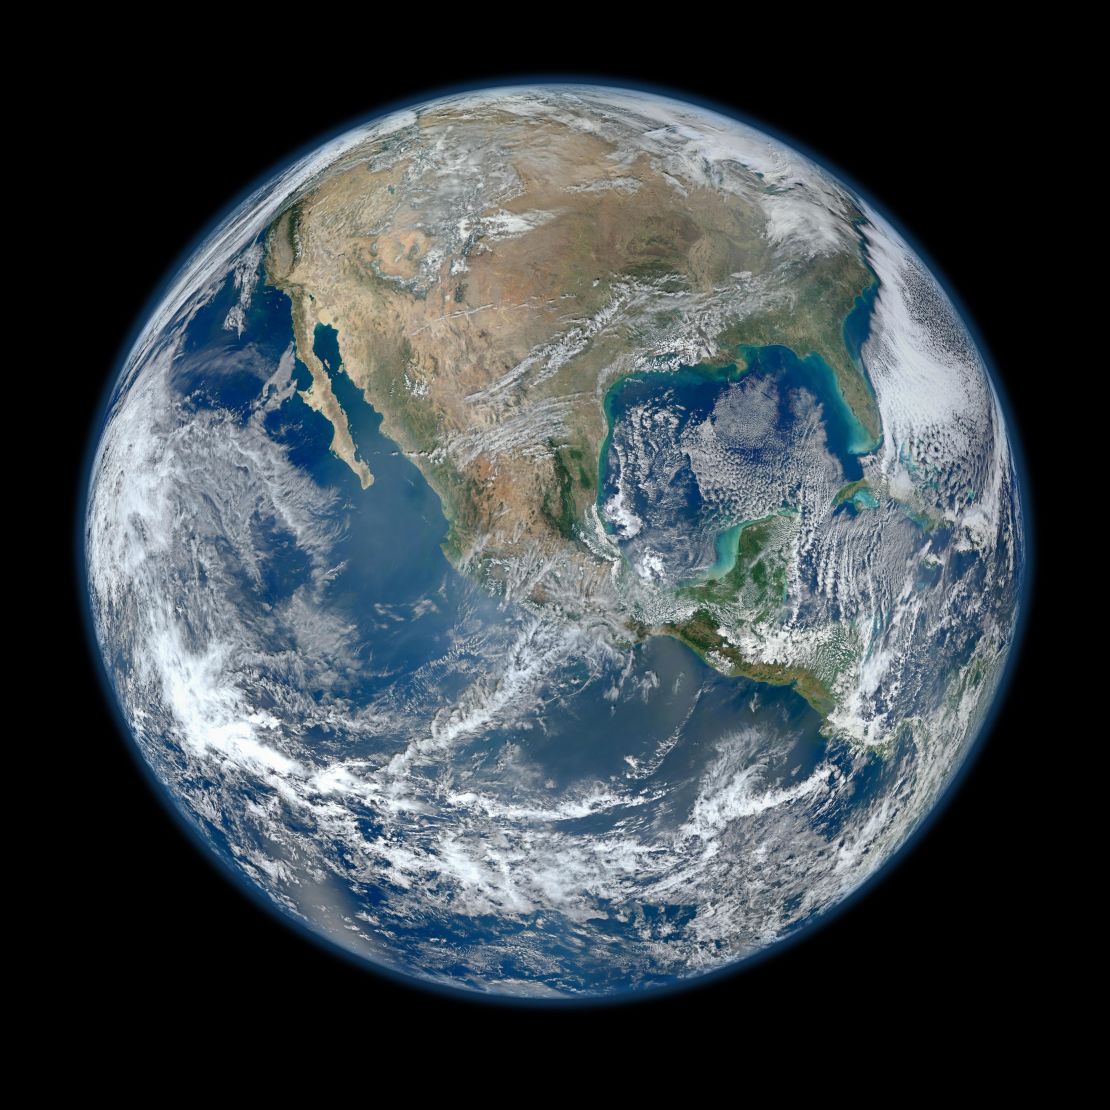 Behold one of the more stunningly detailed images of the Earth yet created. This Blue Marble Earth montage, created from photographs taken by the VIIRS instrument on board the Suomi NPP satellite, shows many stunning details of our home planet.